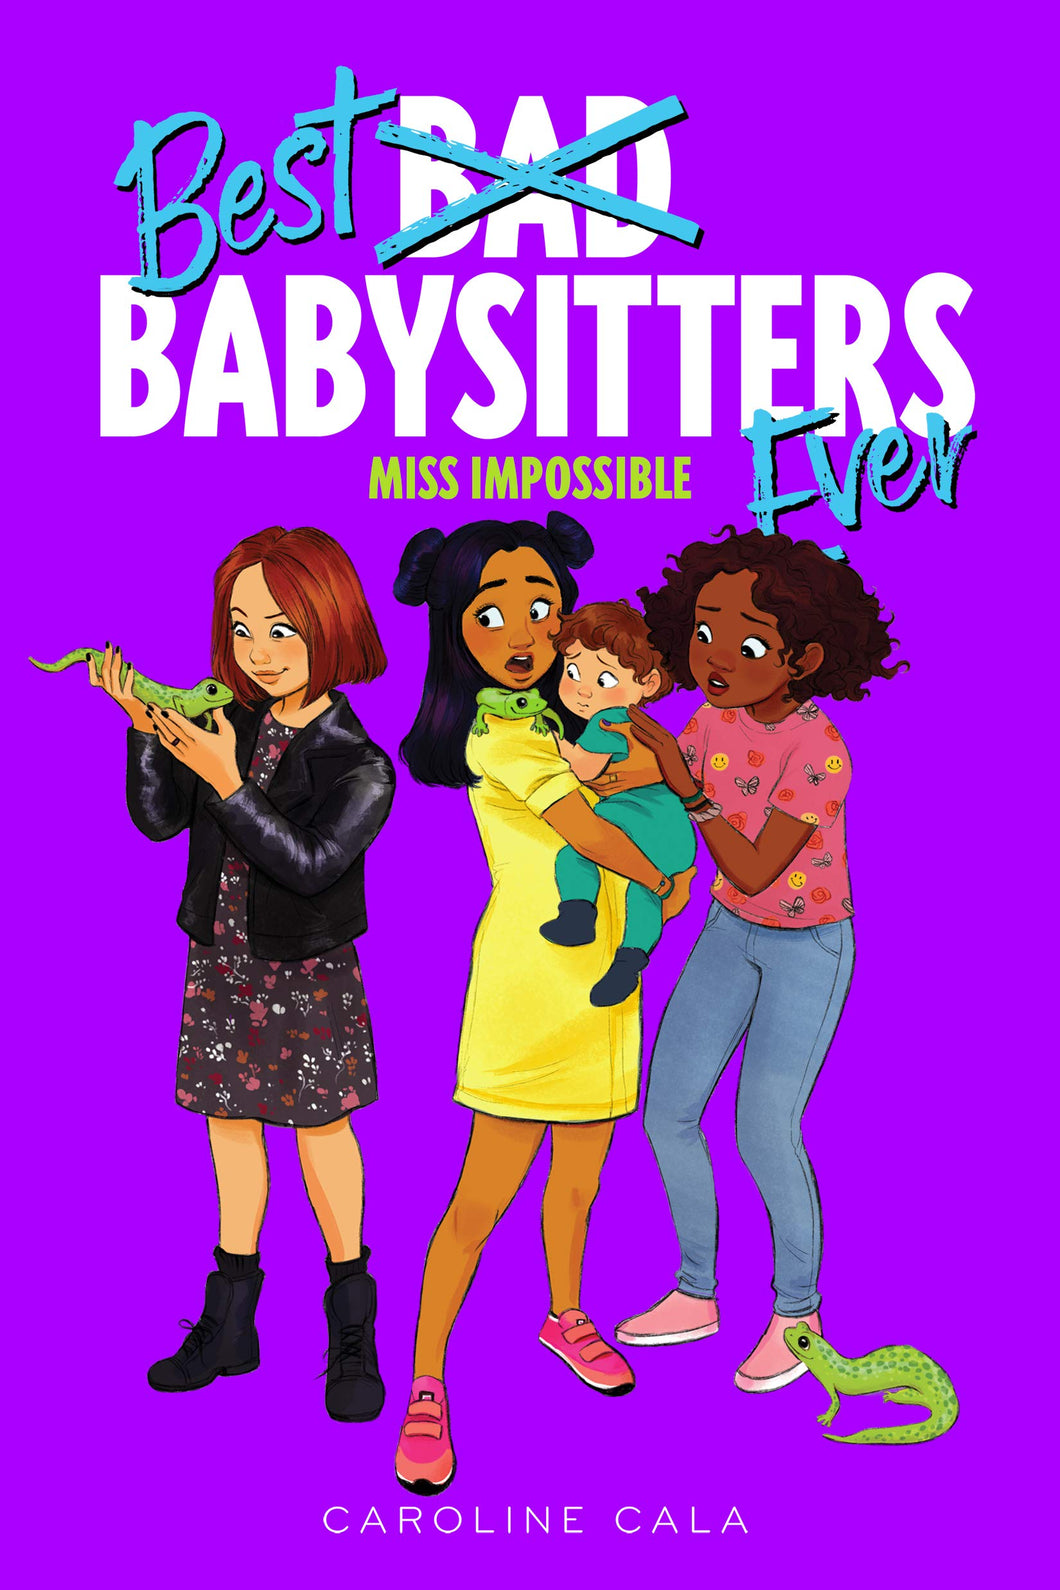 Best Babysitters Ever (Miss Impossible)